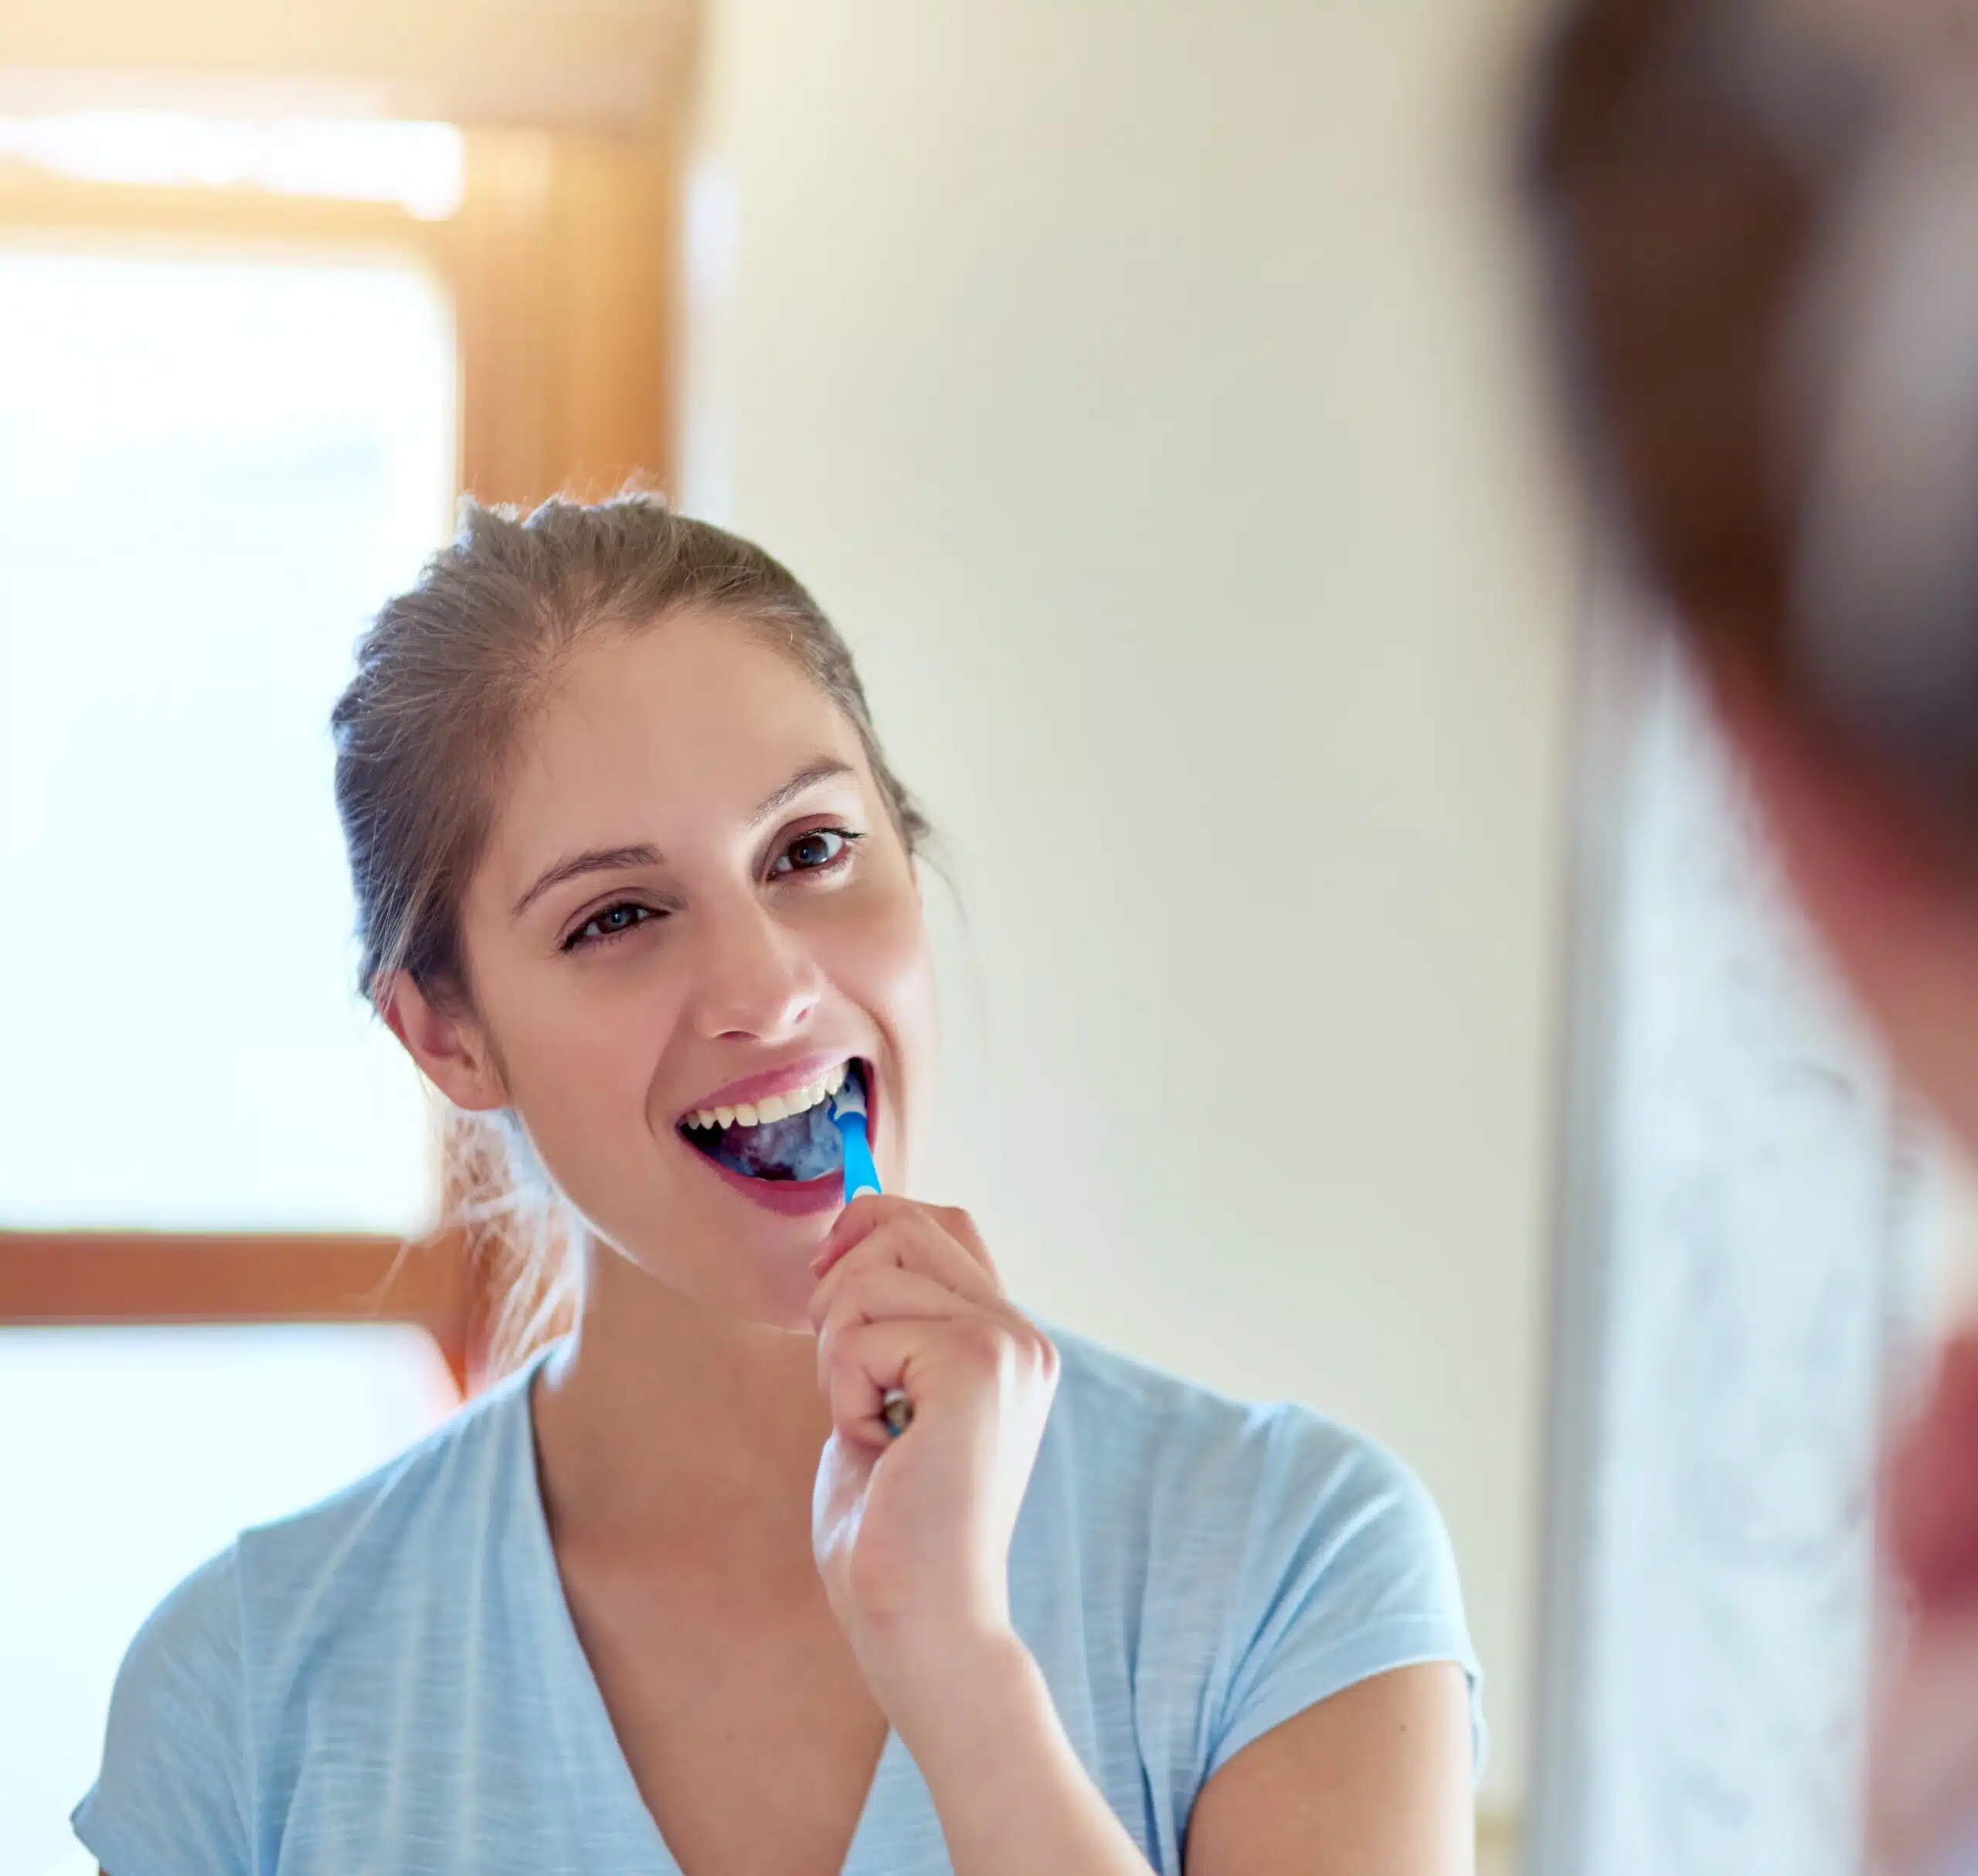 A smiling woman brushes her teeth in a mirror.